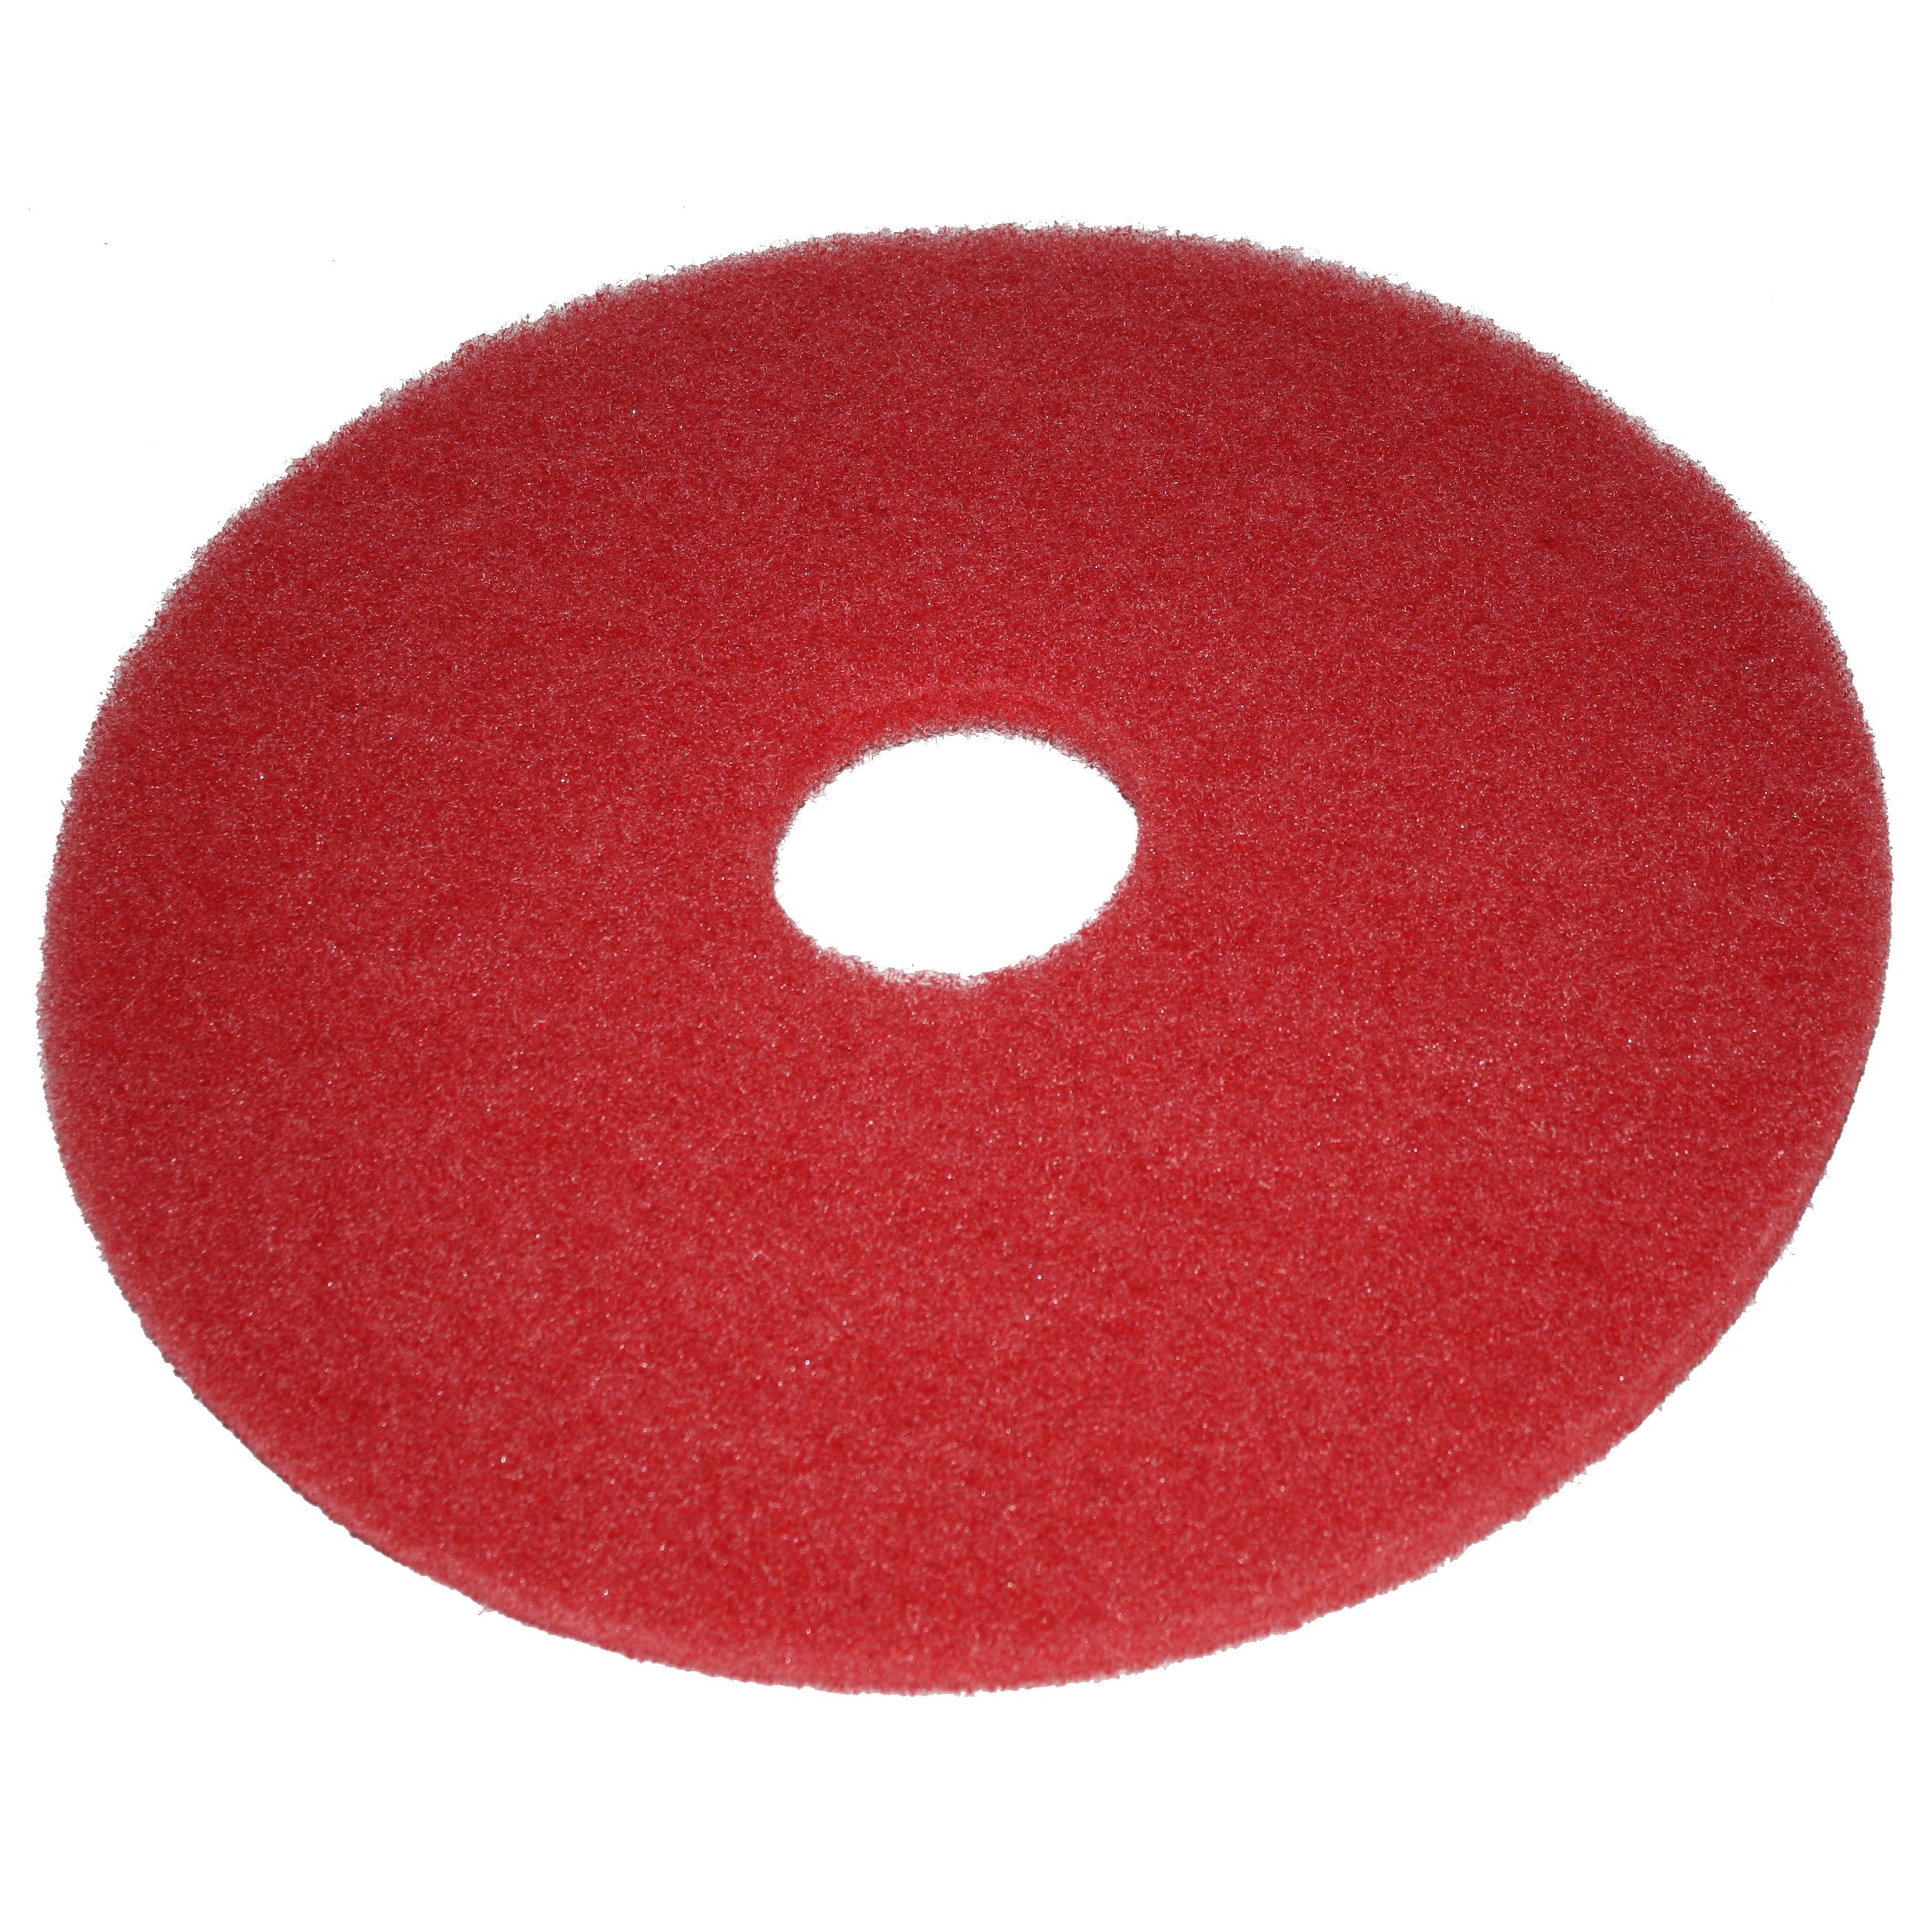 Pad rouge, Ø 203 mm, polyester